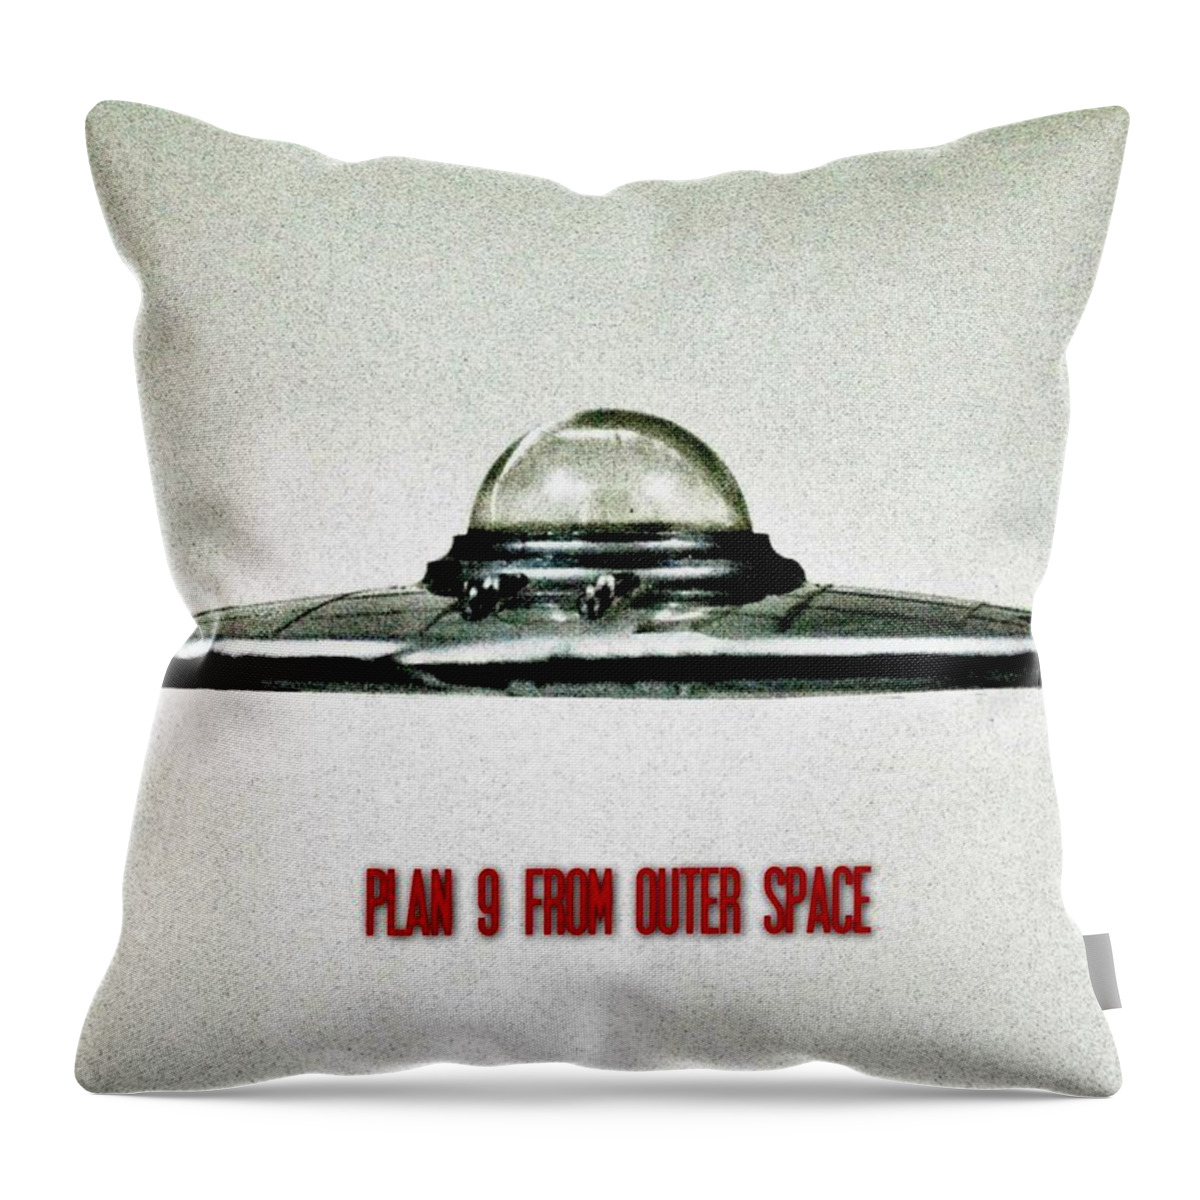 Ufo Throw Pillow featuring the photograph Plan 9 From Outer Space by Benjamin Yeager